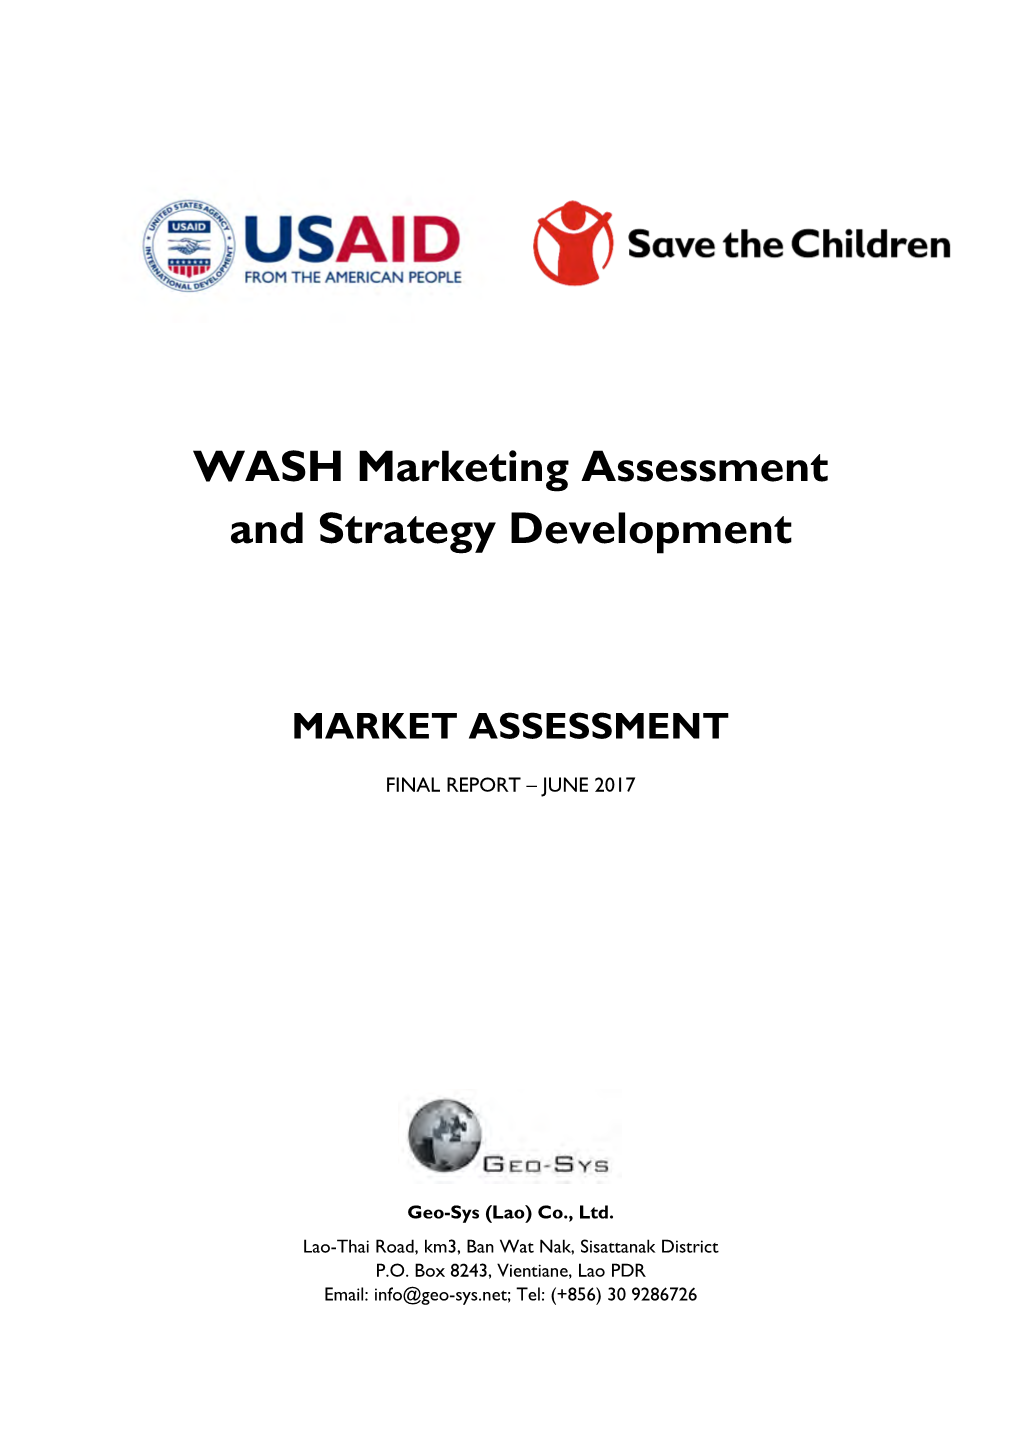 WASH Marketing Assessment and Strategy Development